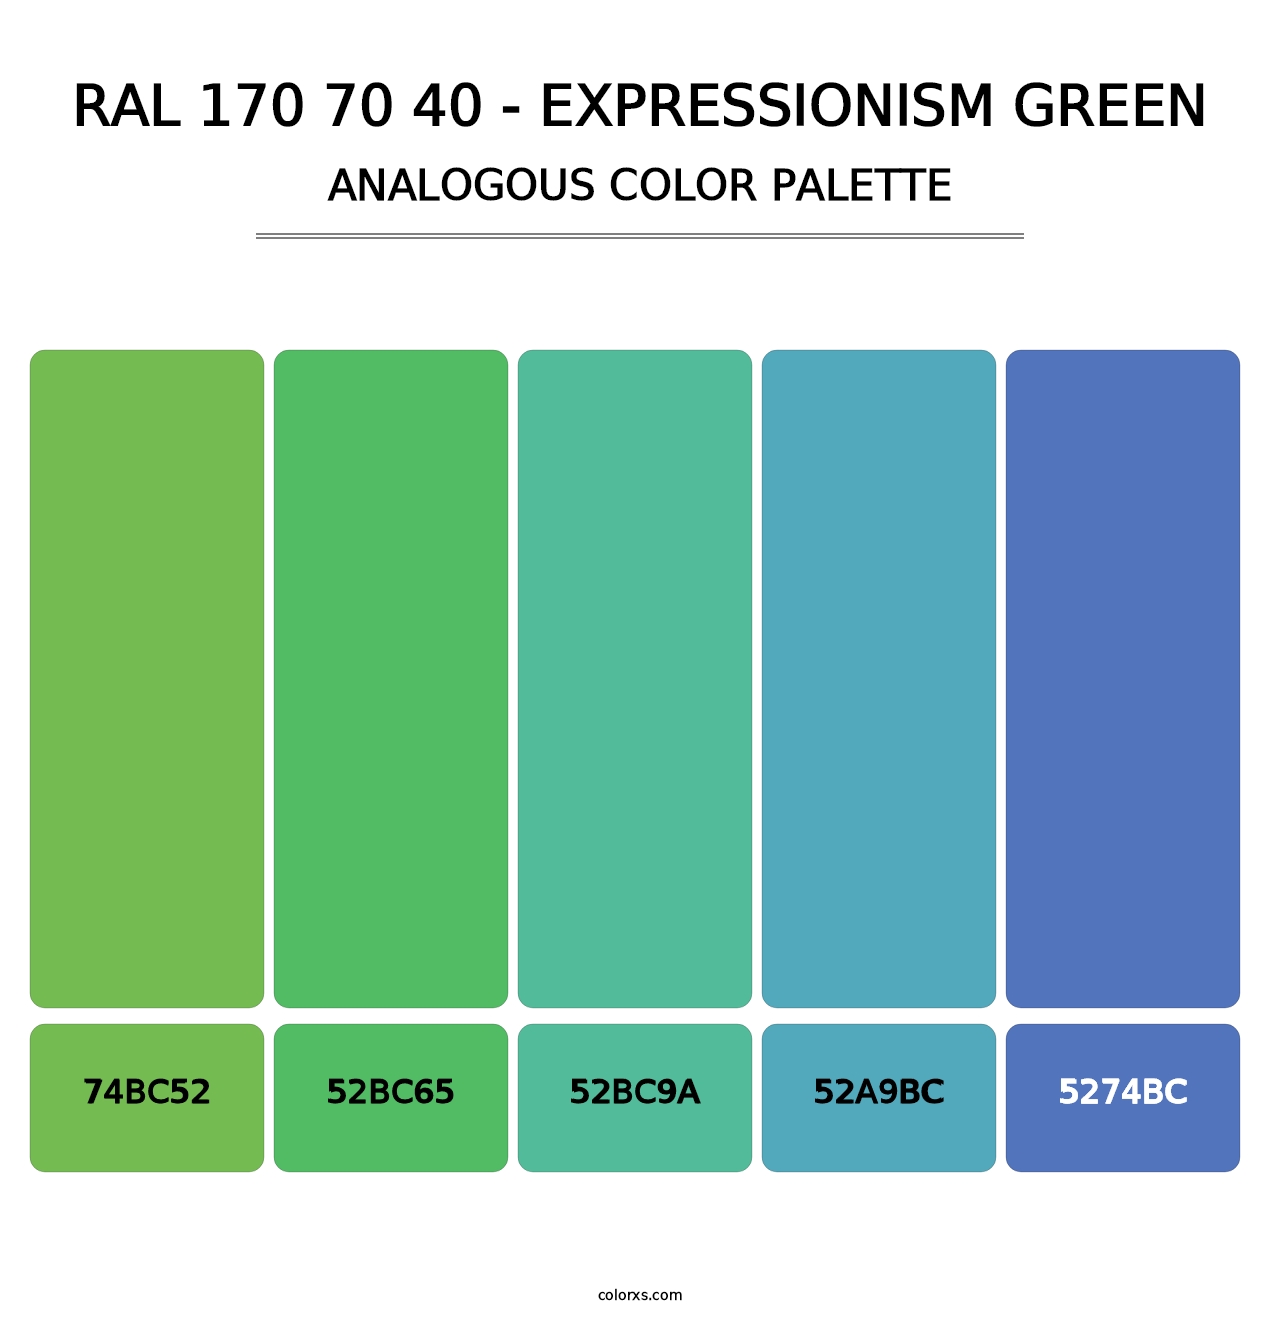 RAL 170 70 40 - Expressionism Green - Analogous Color Palette